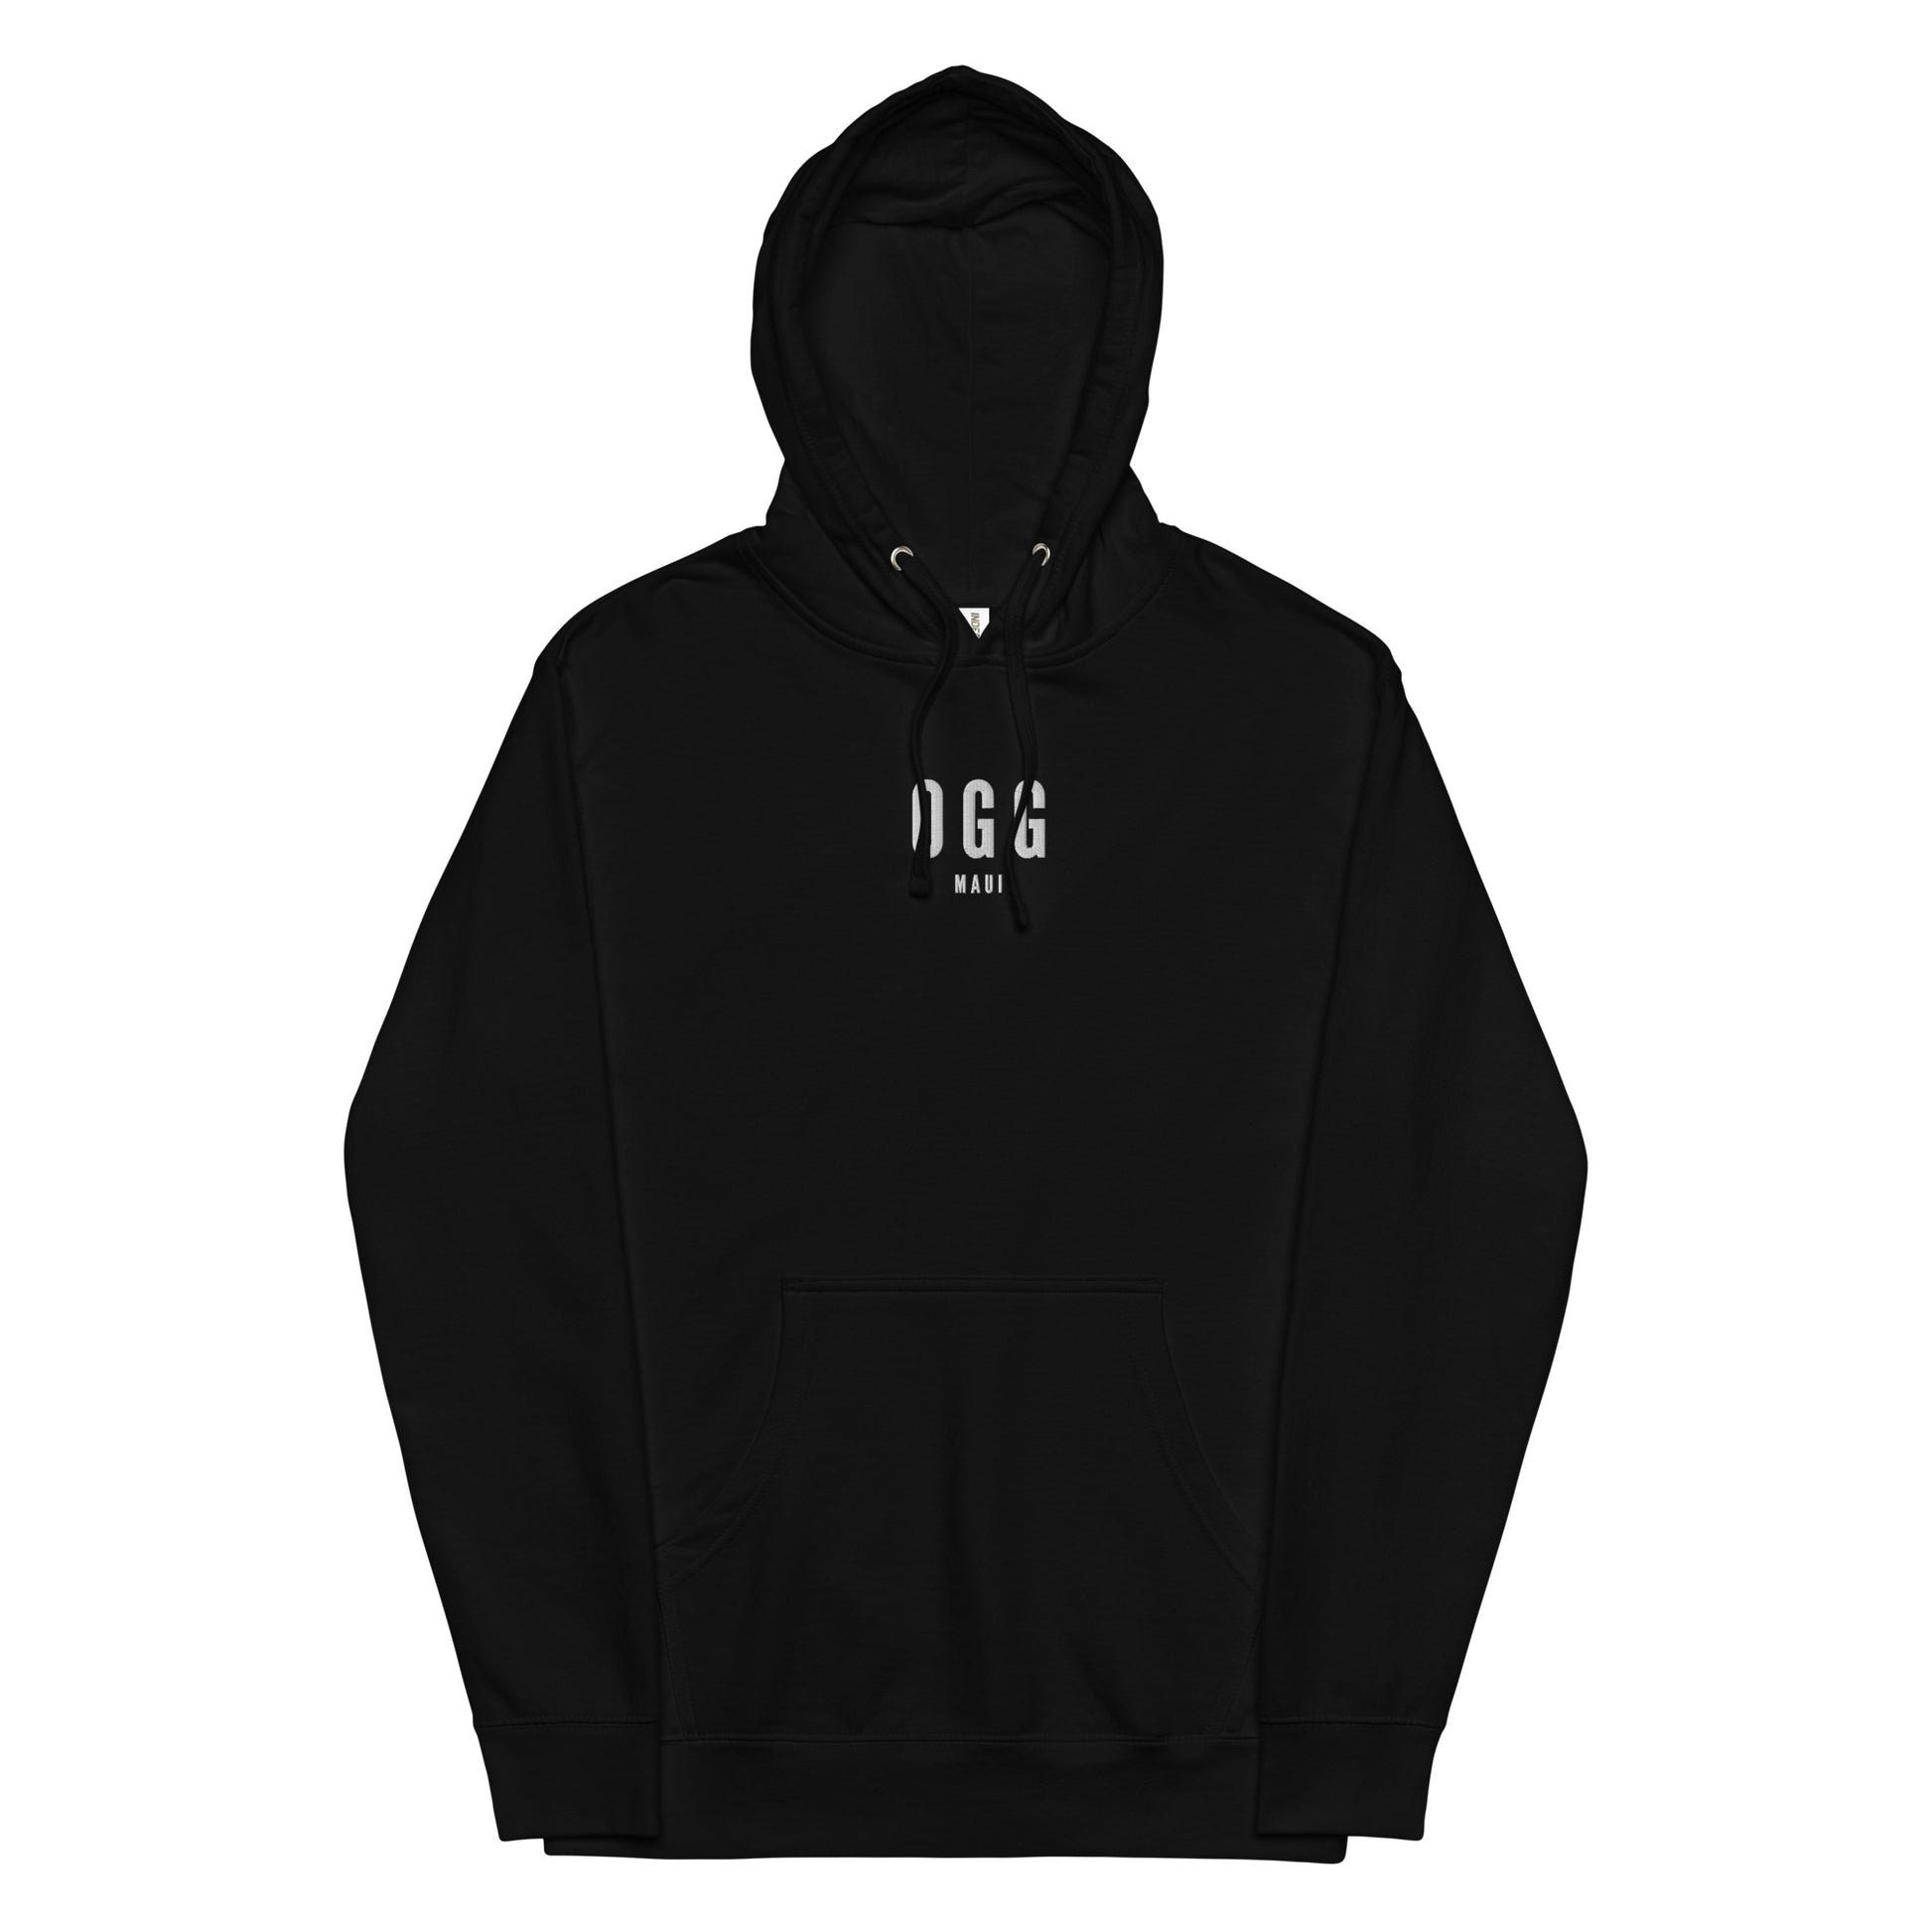 City Midweight Hoodie - White • OGG Maui • YHM Designs - Image 10